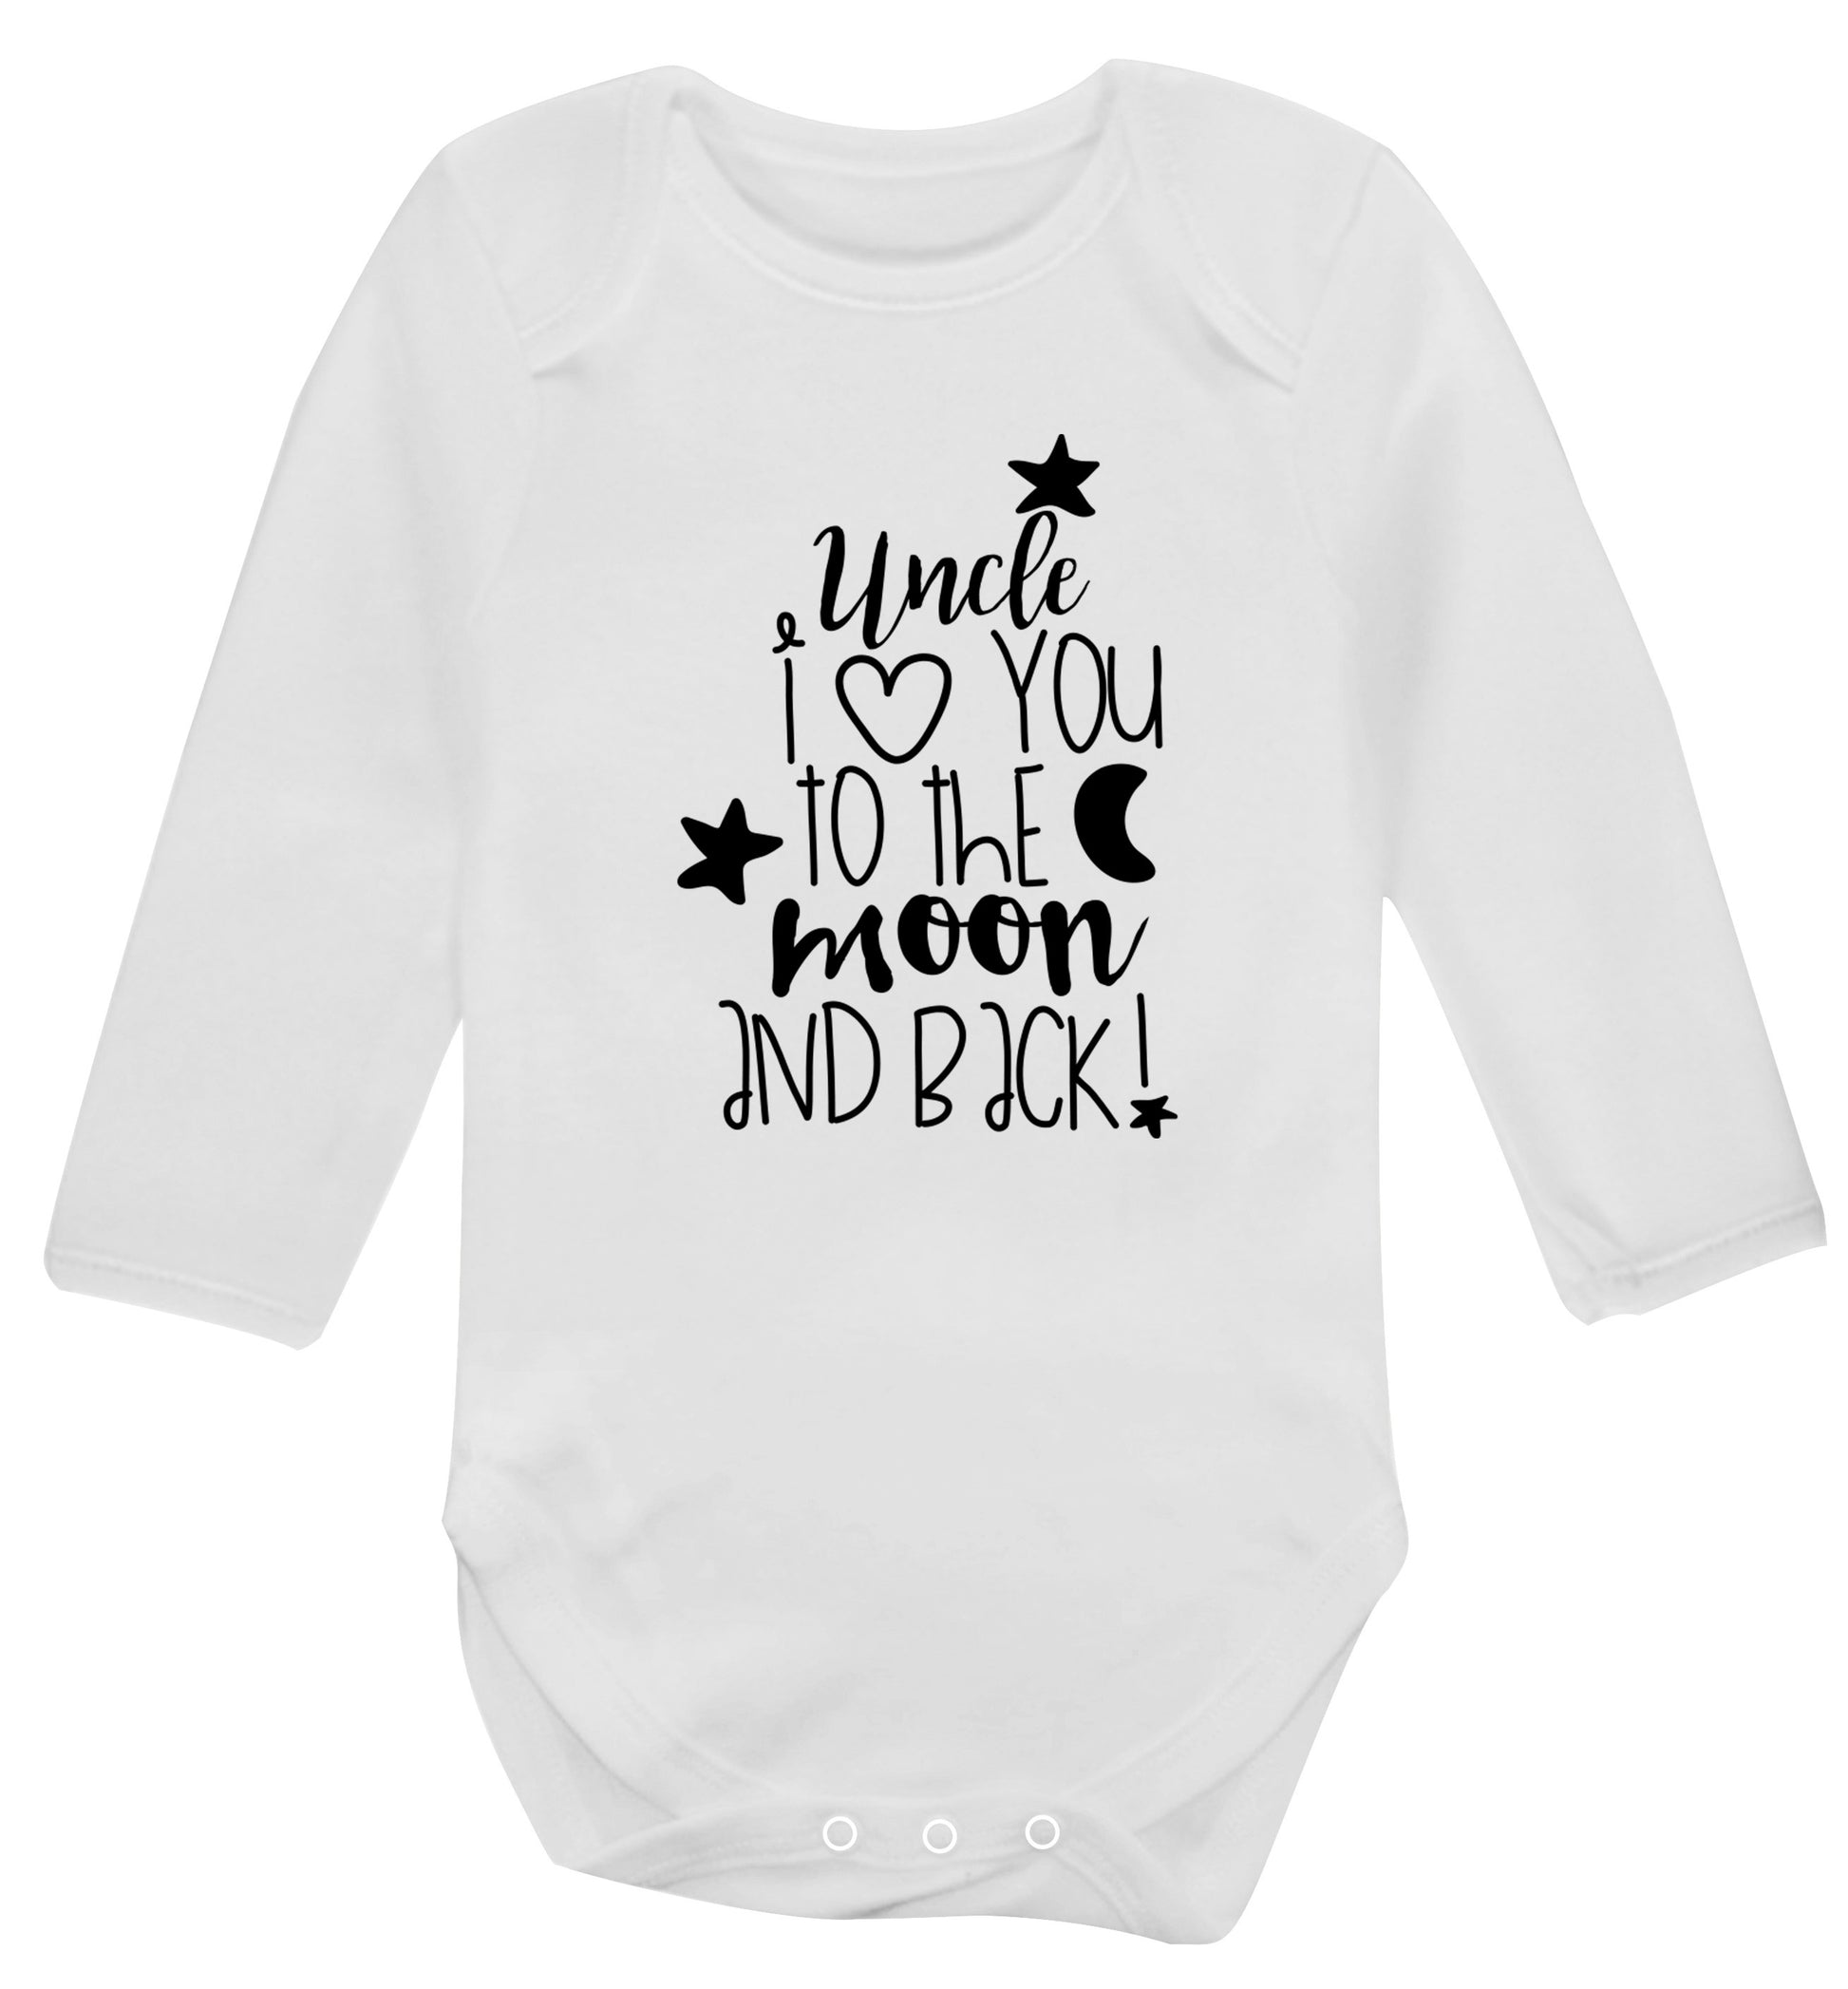 Uncle I love you to the moon and back Baby Vest long sleeved white 6-12 months